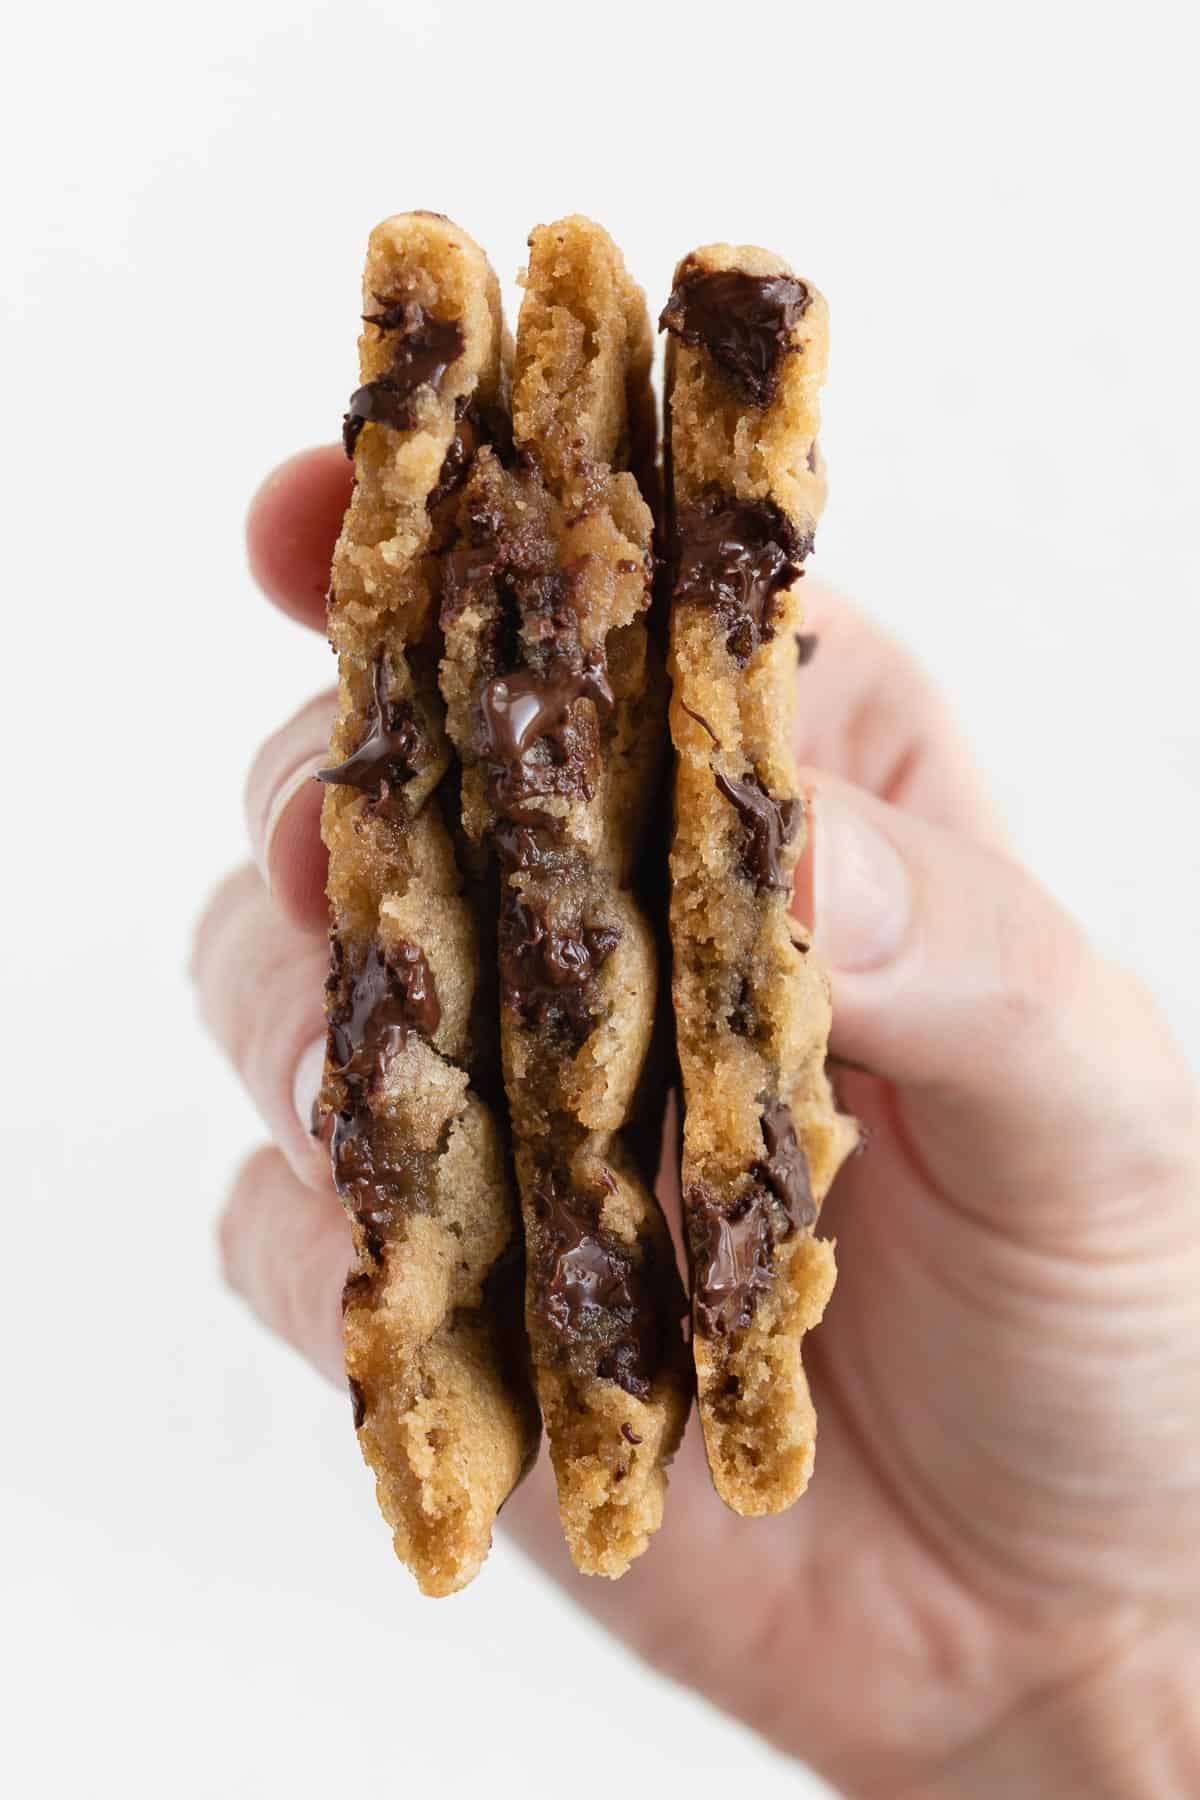 a hand holding three halves of gooey chocolate chip cookies